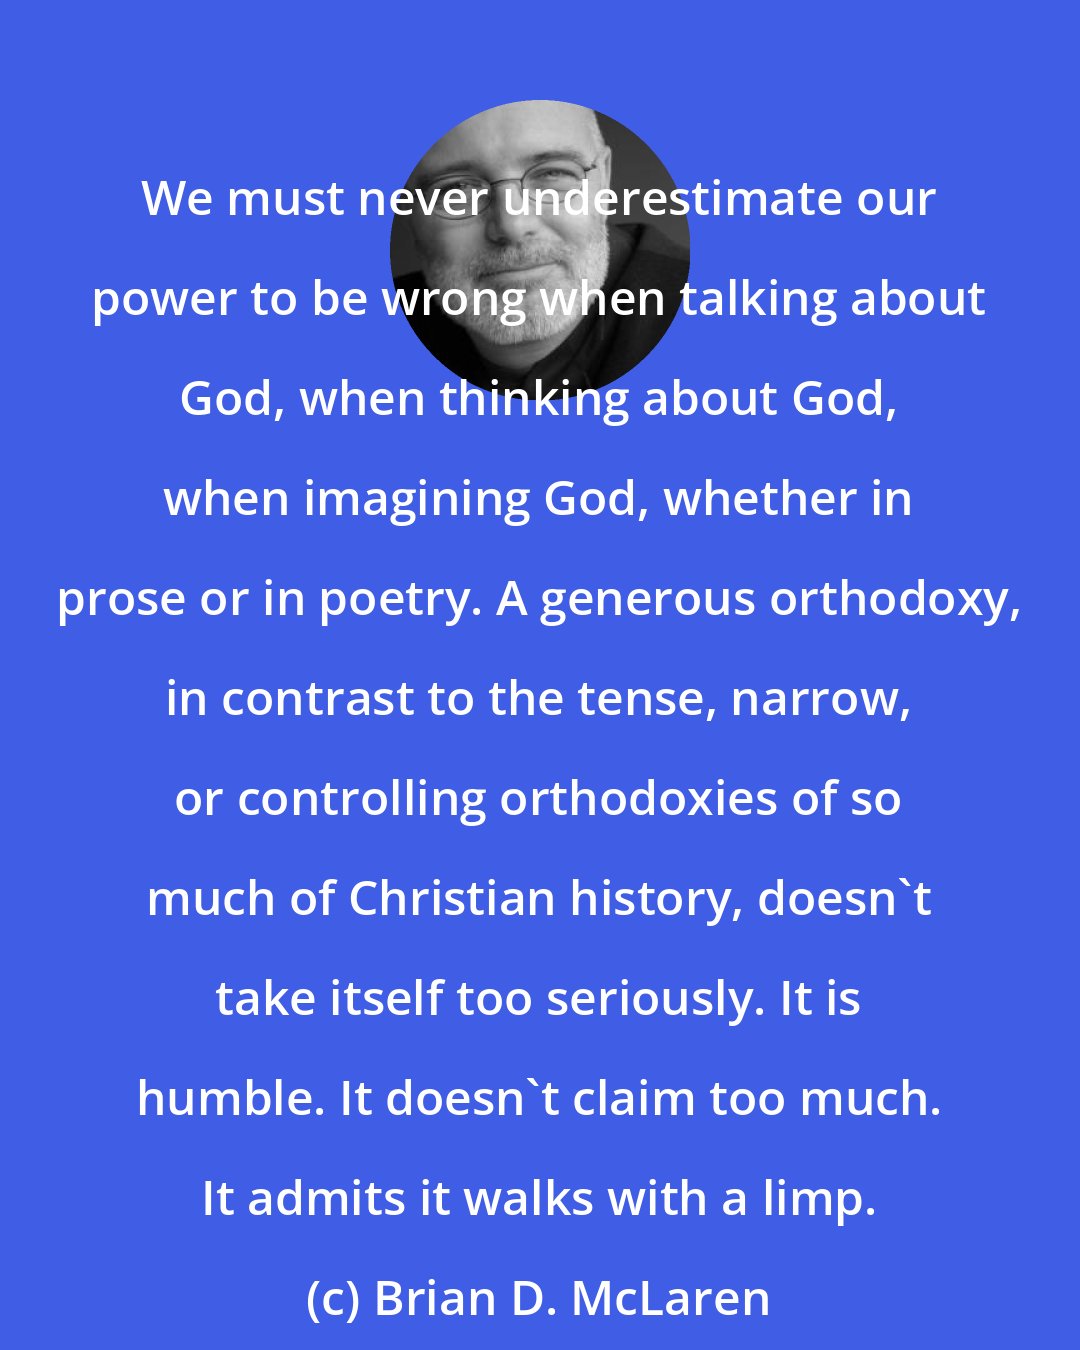 Brian D. McLaren: We must never underestimate our power to be wrong when talking about God, when thinking about God, when imagining God, whether in prose or in poetry. A generous orthodoxy, in contrast to the tense, narrow, or controlling orthodoxies of so much of Christian history, doesn't take itself too seriously. It is humble. It doesn't claim too much. It admits it walks with a limp.